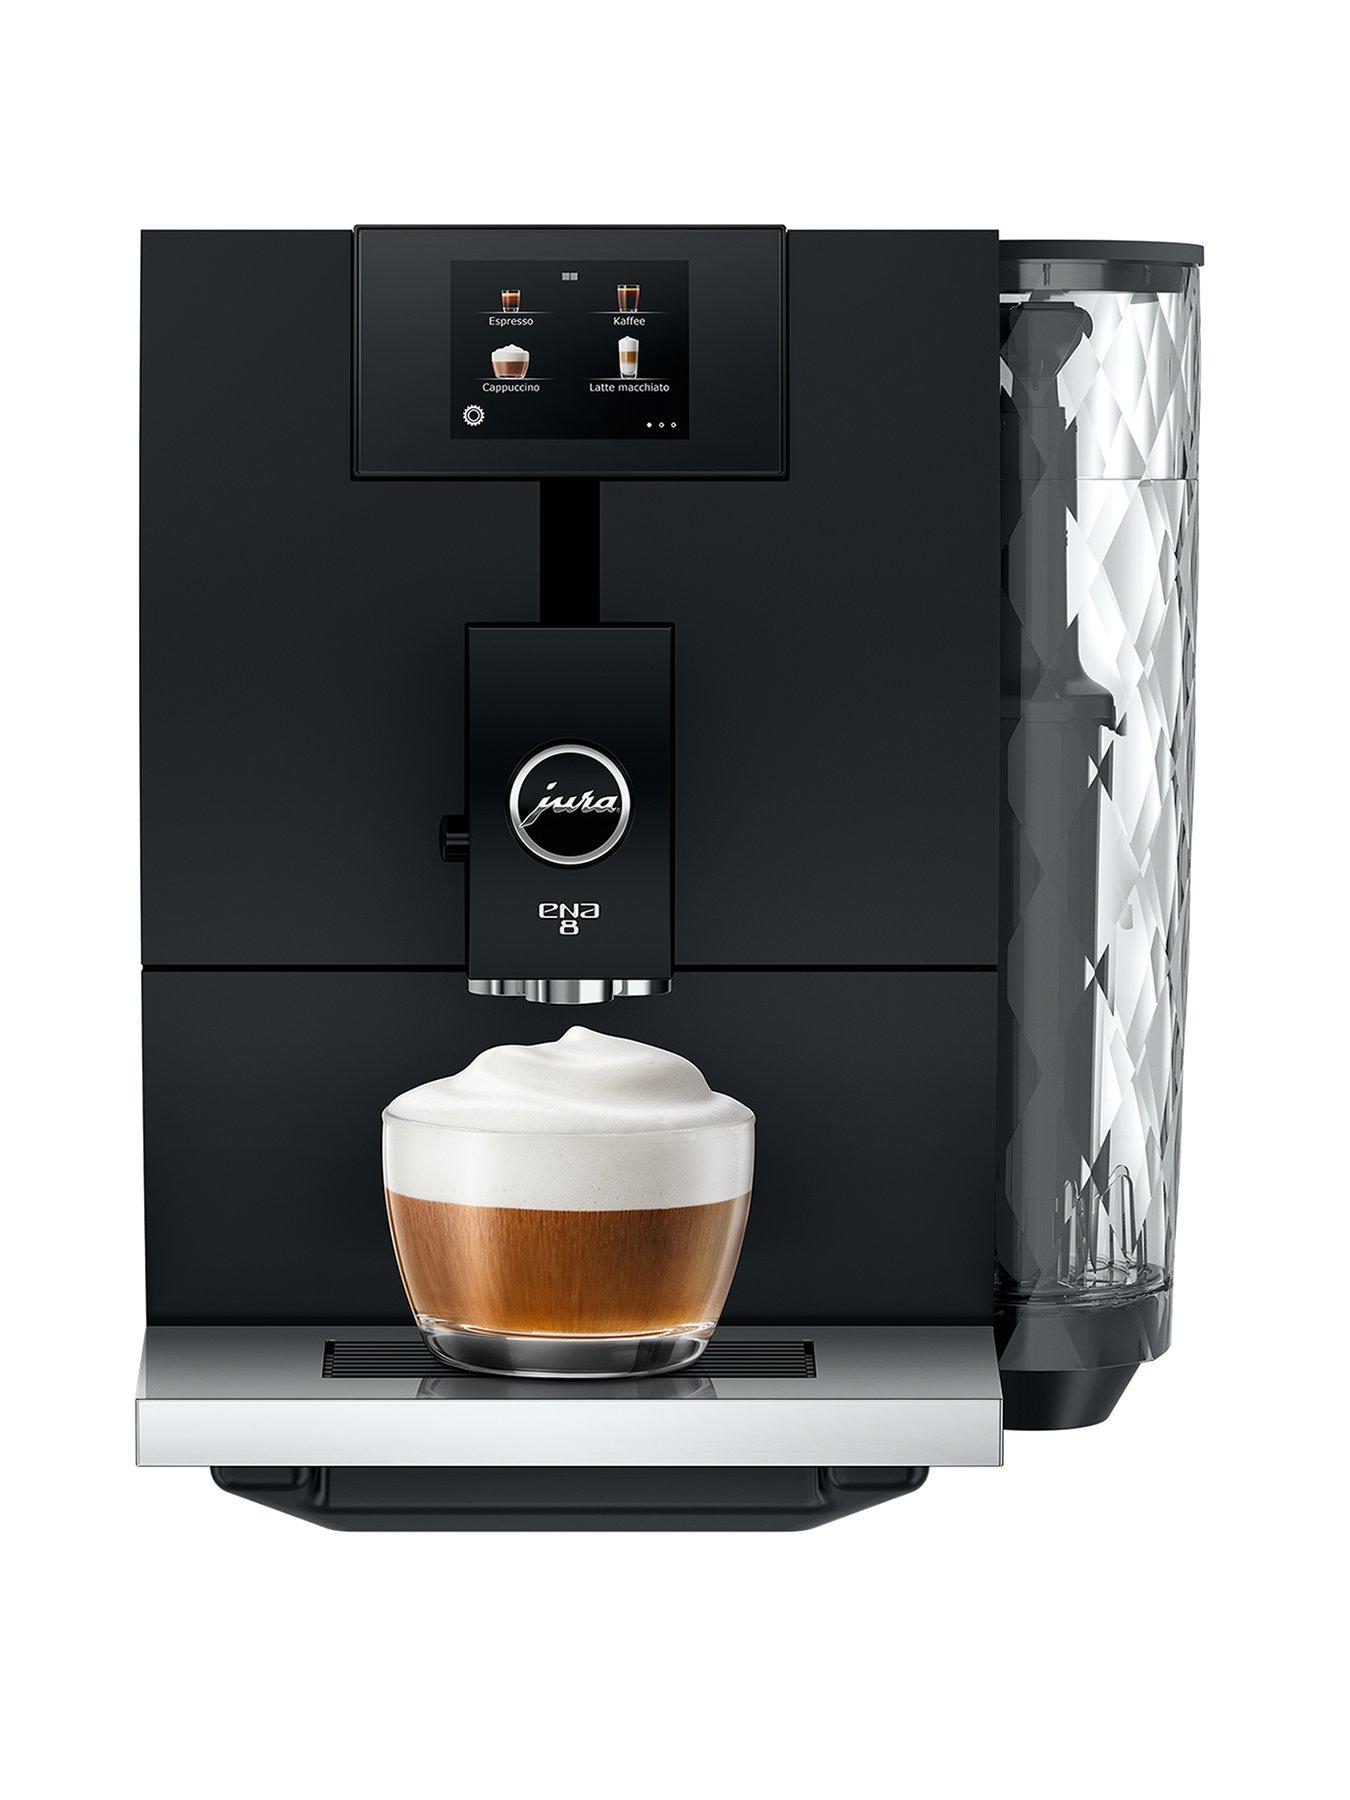 Barista for a Fortnight: A Philips L'OR Barista Latte Review